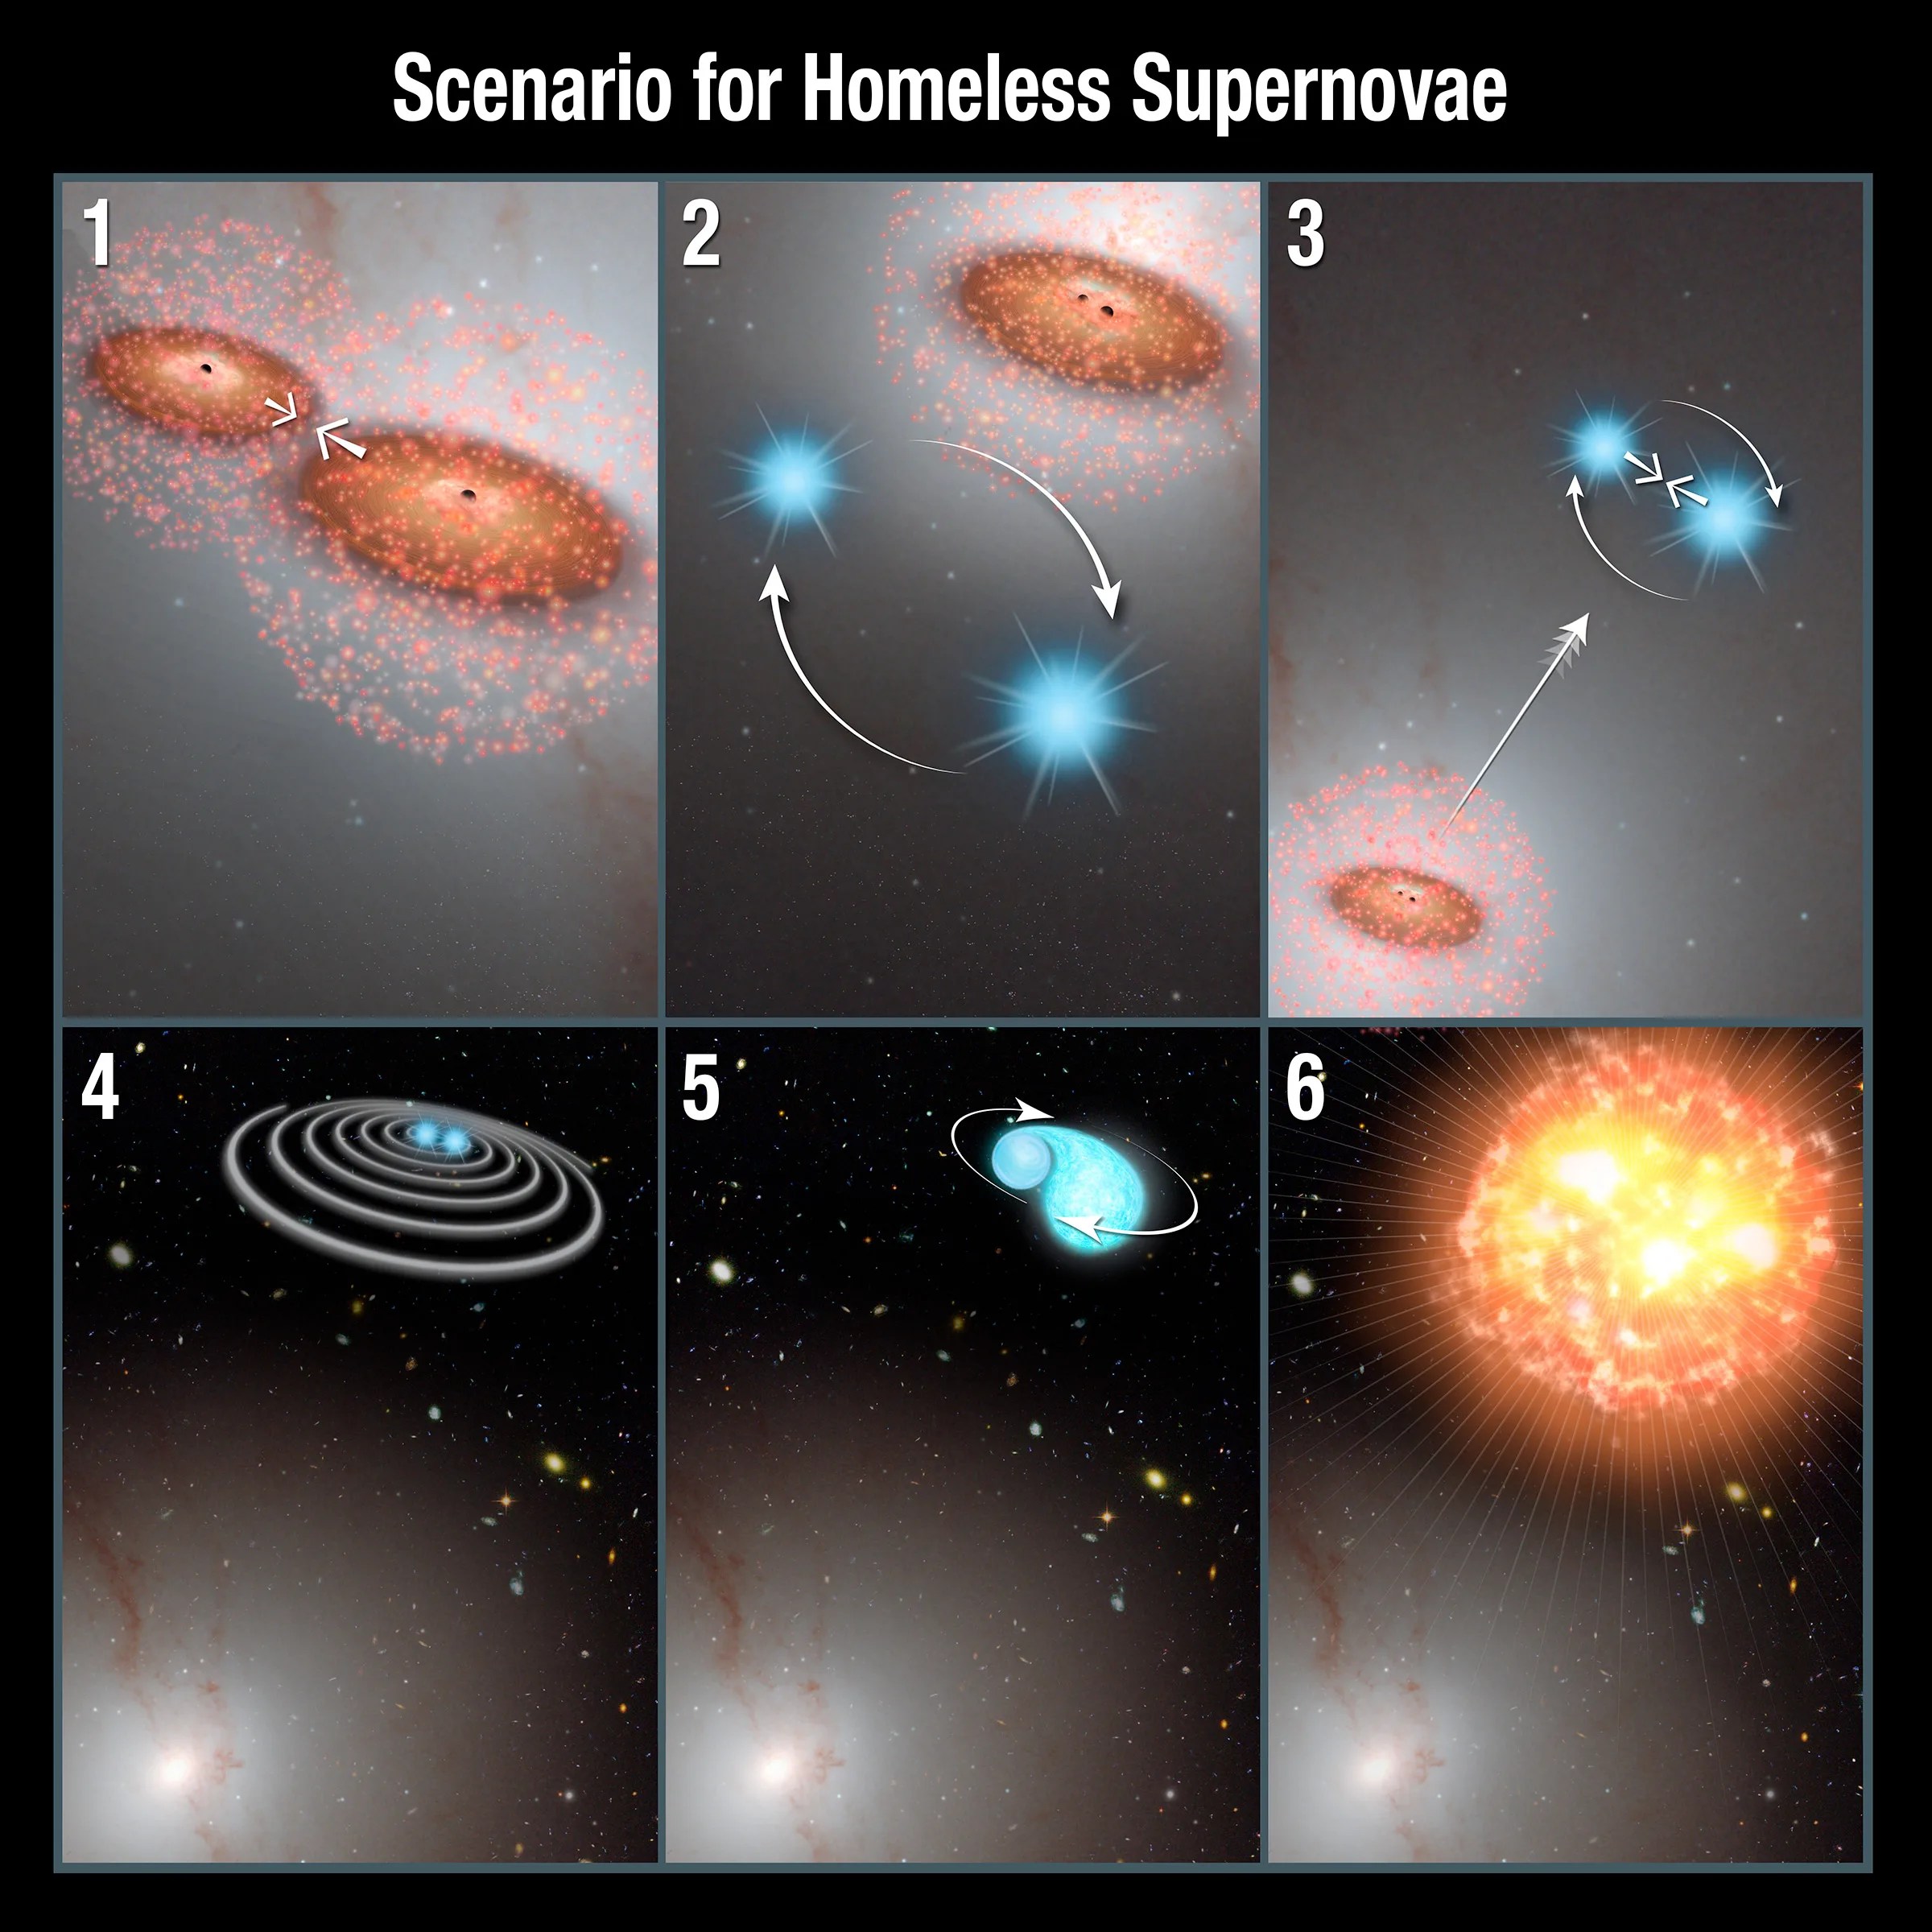 An illustration of how stars may explode as supernovae outside the confines of galaxies, shown in six numbered panels.